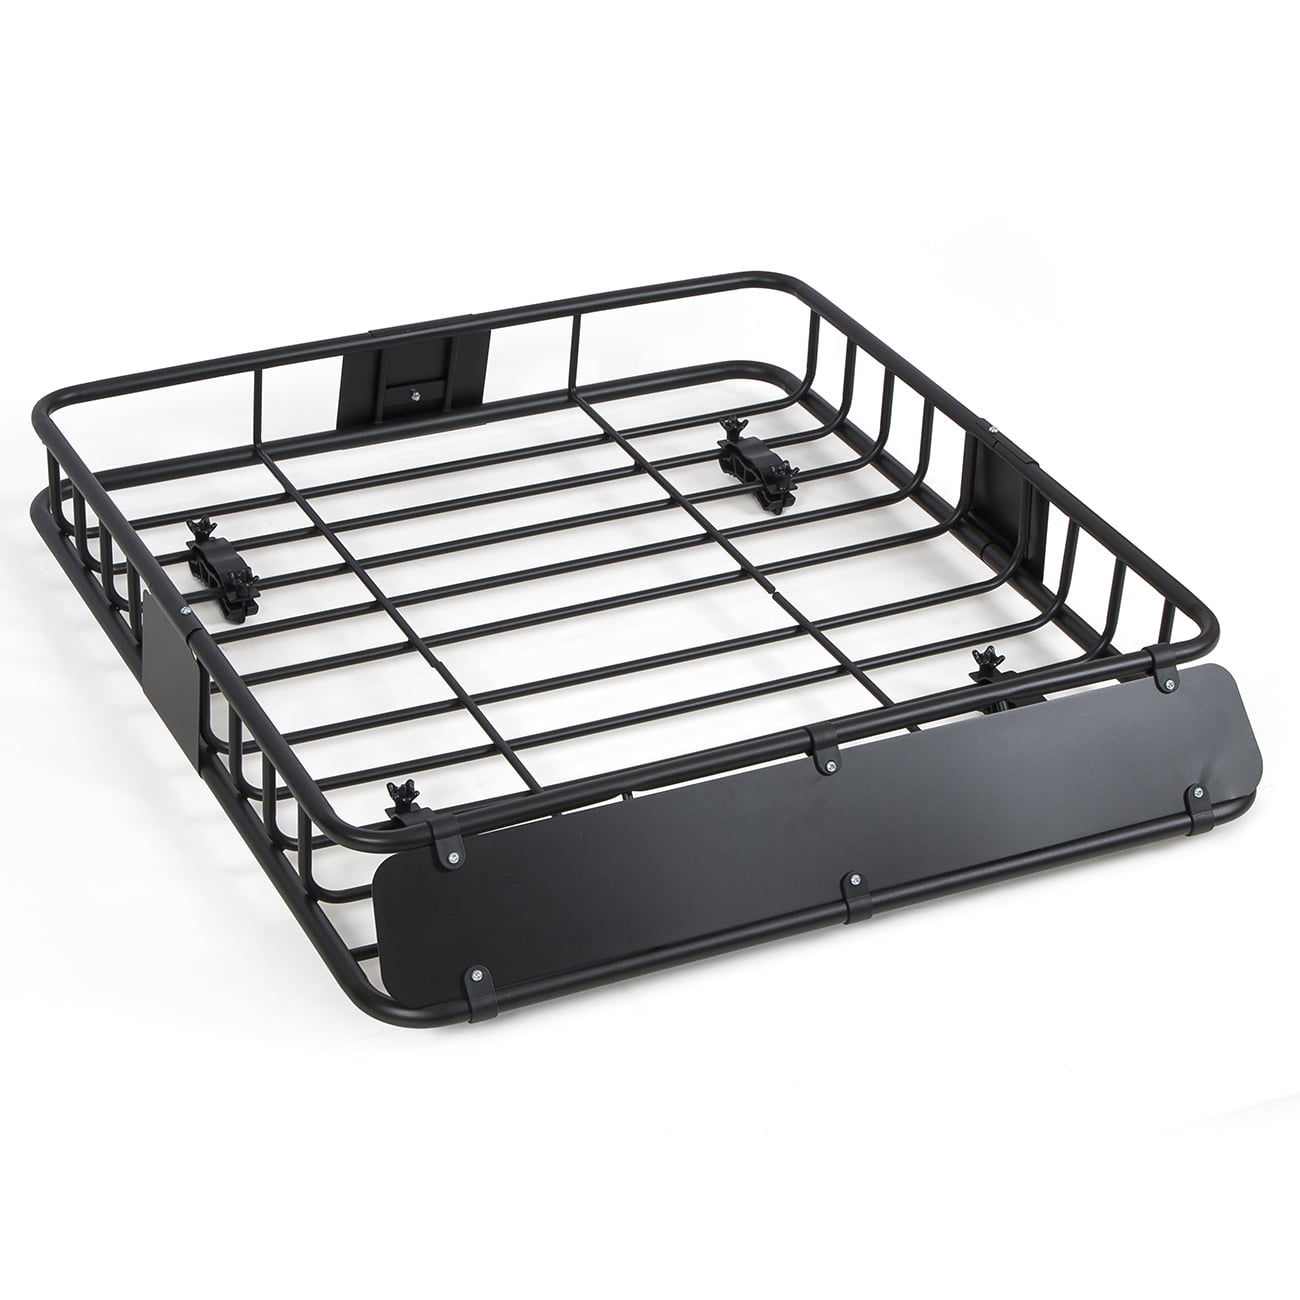 48Lx40Wx6H inch 250 lbs Capacity Black SUNCOO Universal Roof Rack Basket Cars Top Cargo Carrier Luggage Holder with Wind Fairing 